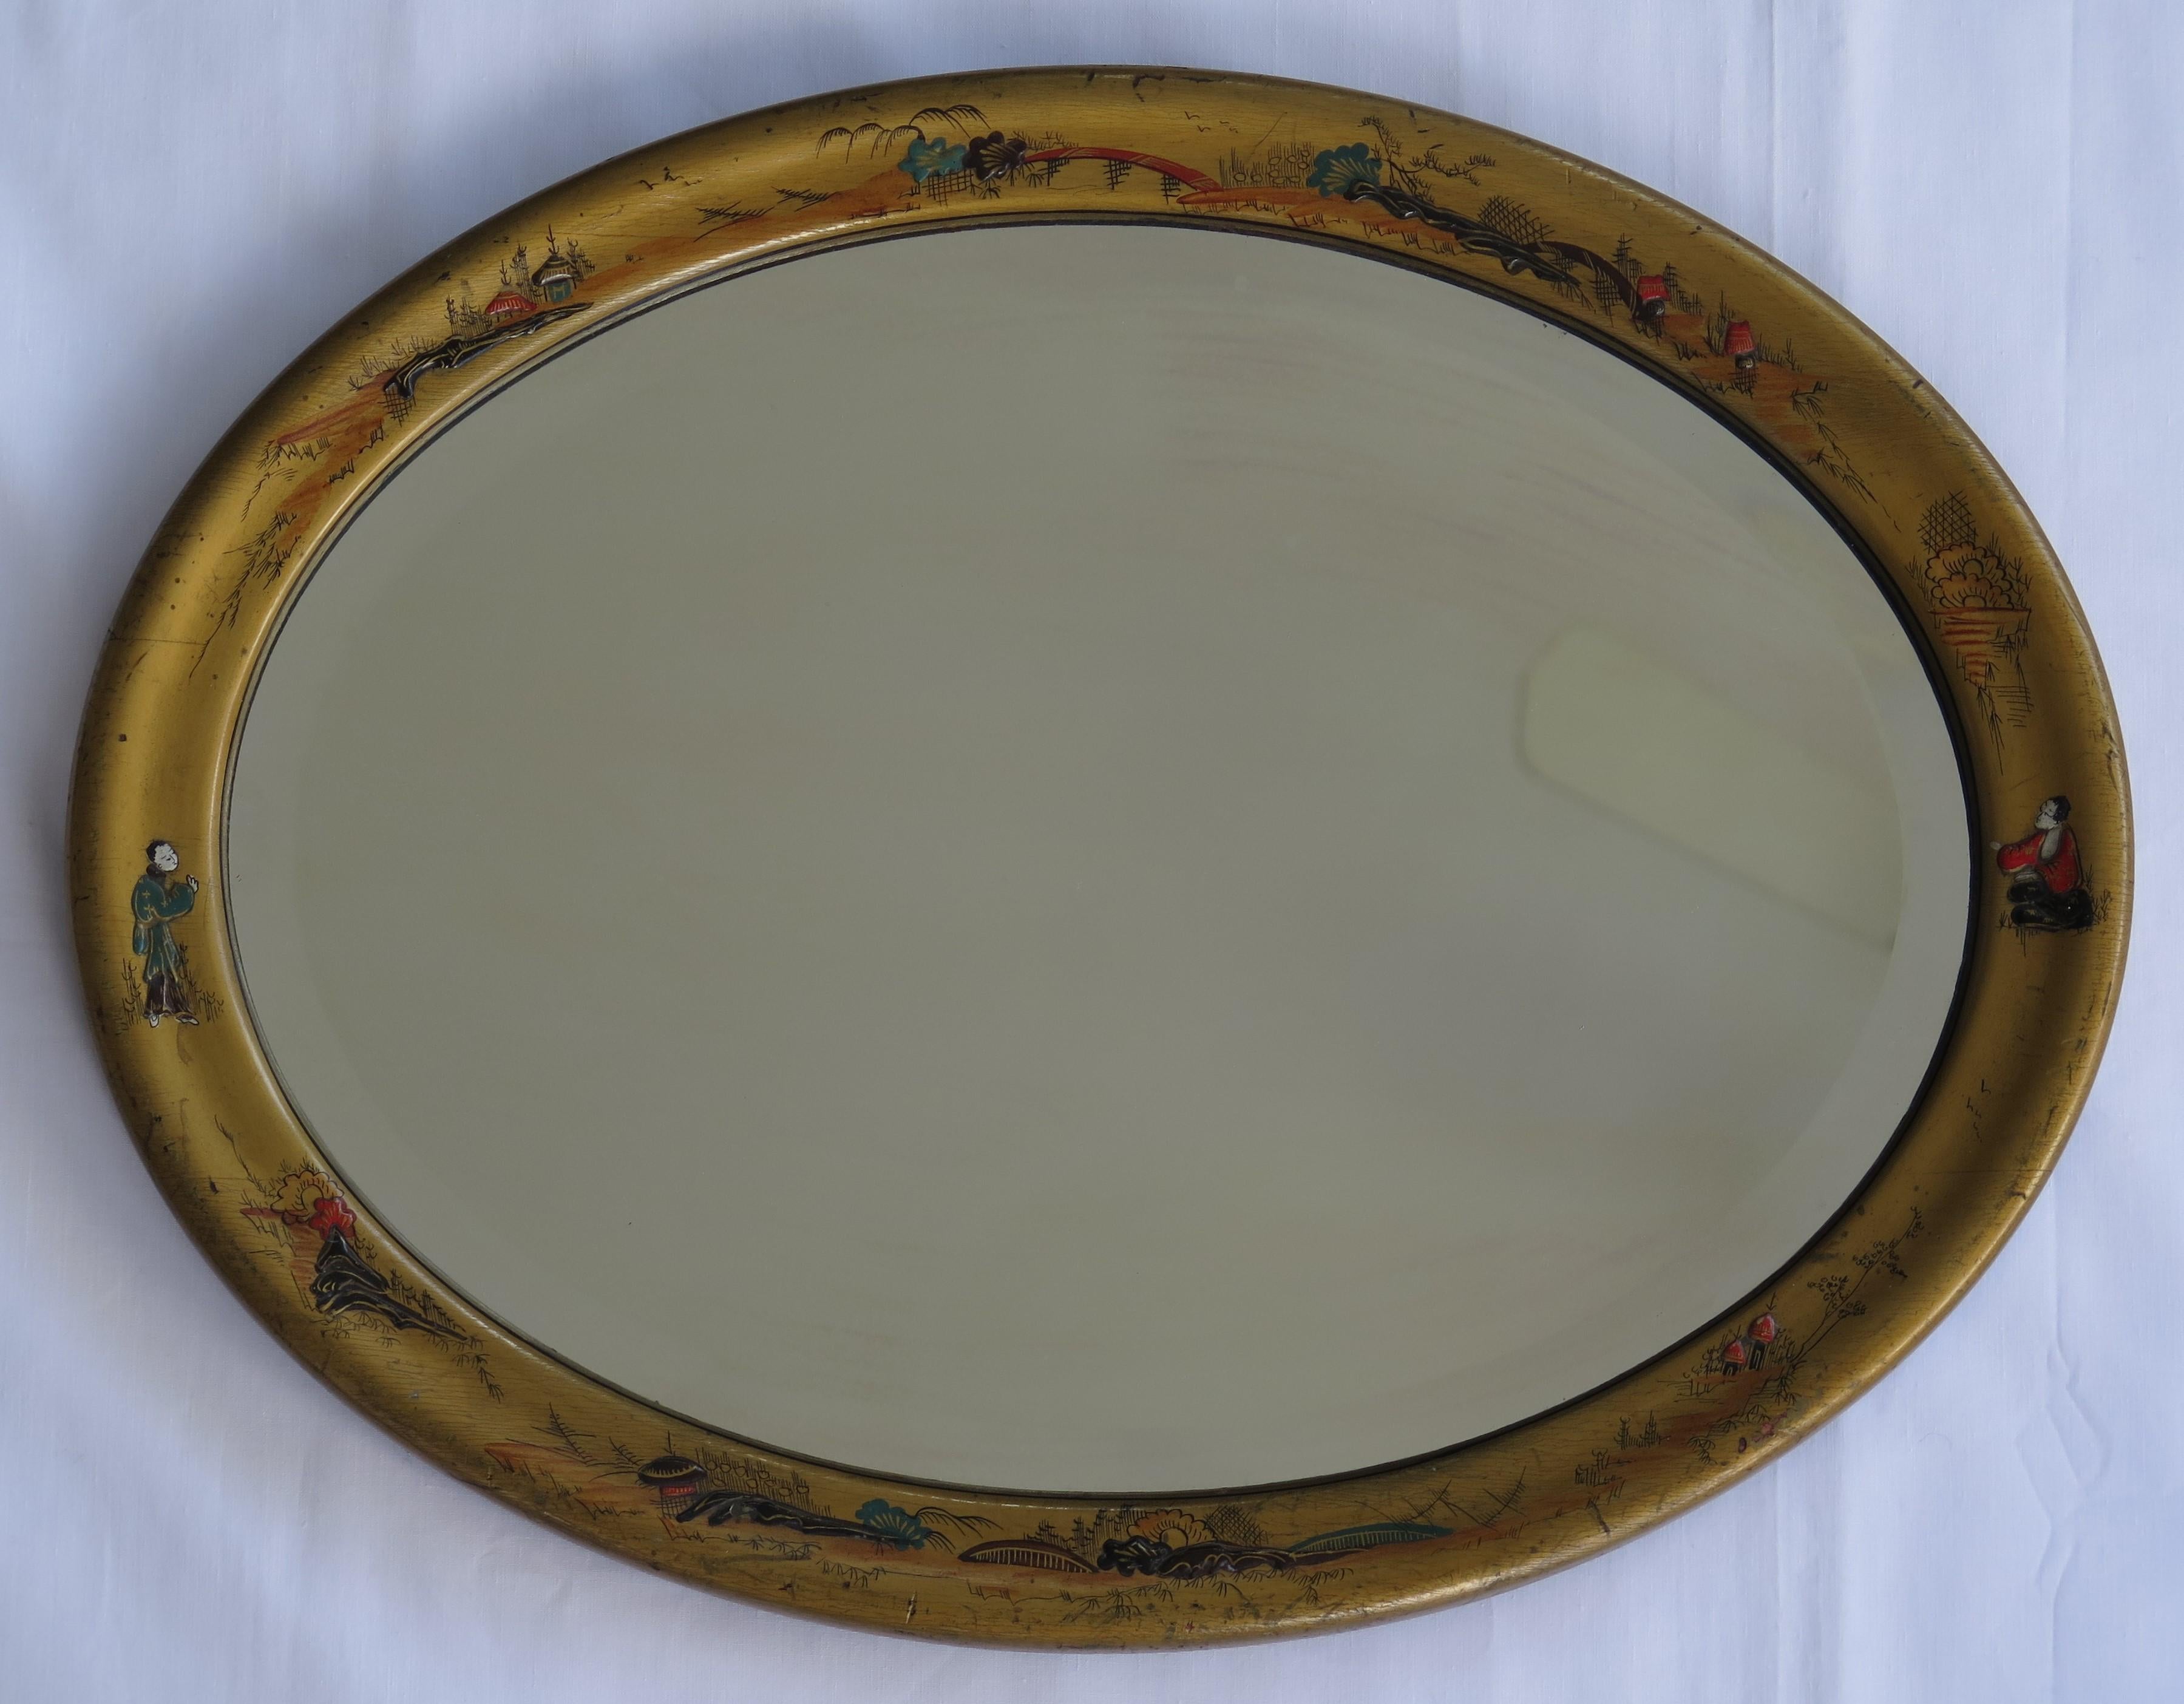 Glazed Oval Edwardian Gilt Chinoiserie Wall Mirror Bevelled Glass, English circa 1900 For Sale